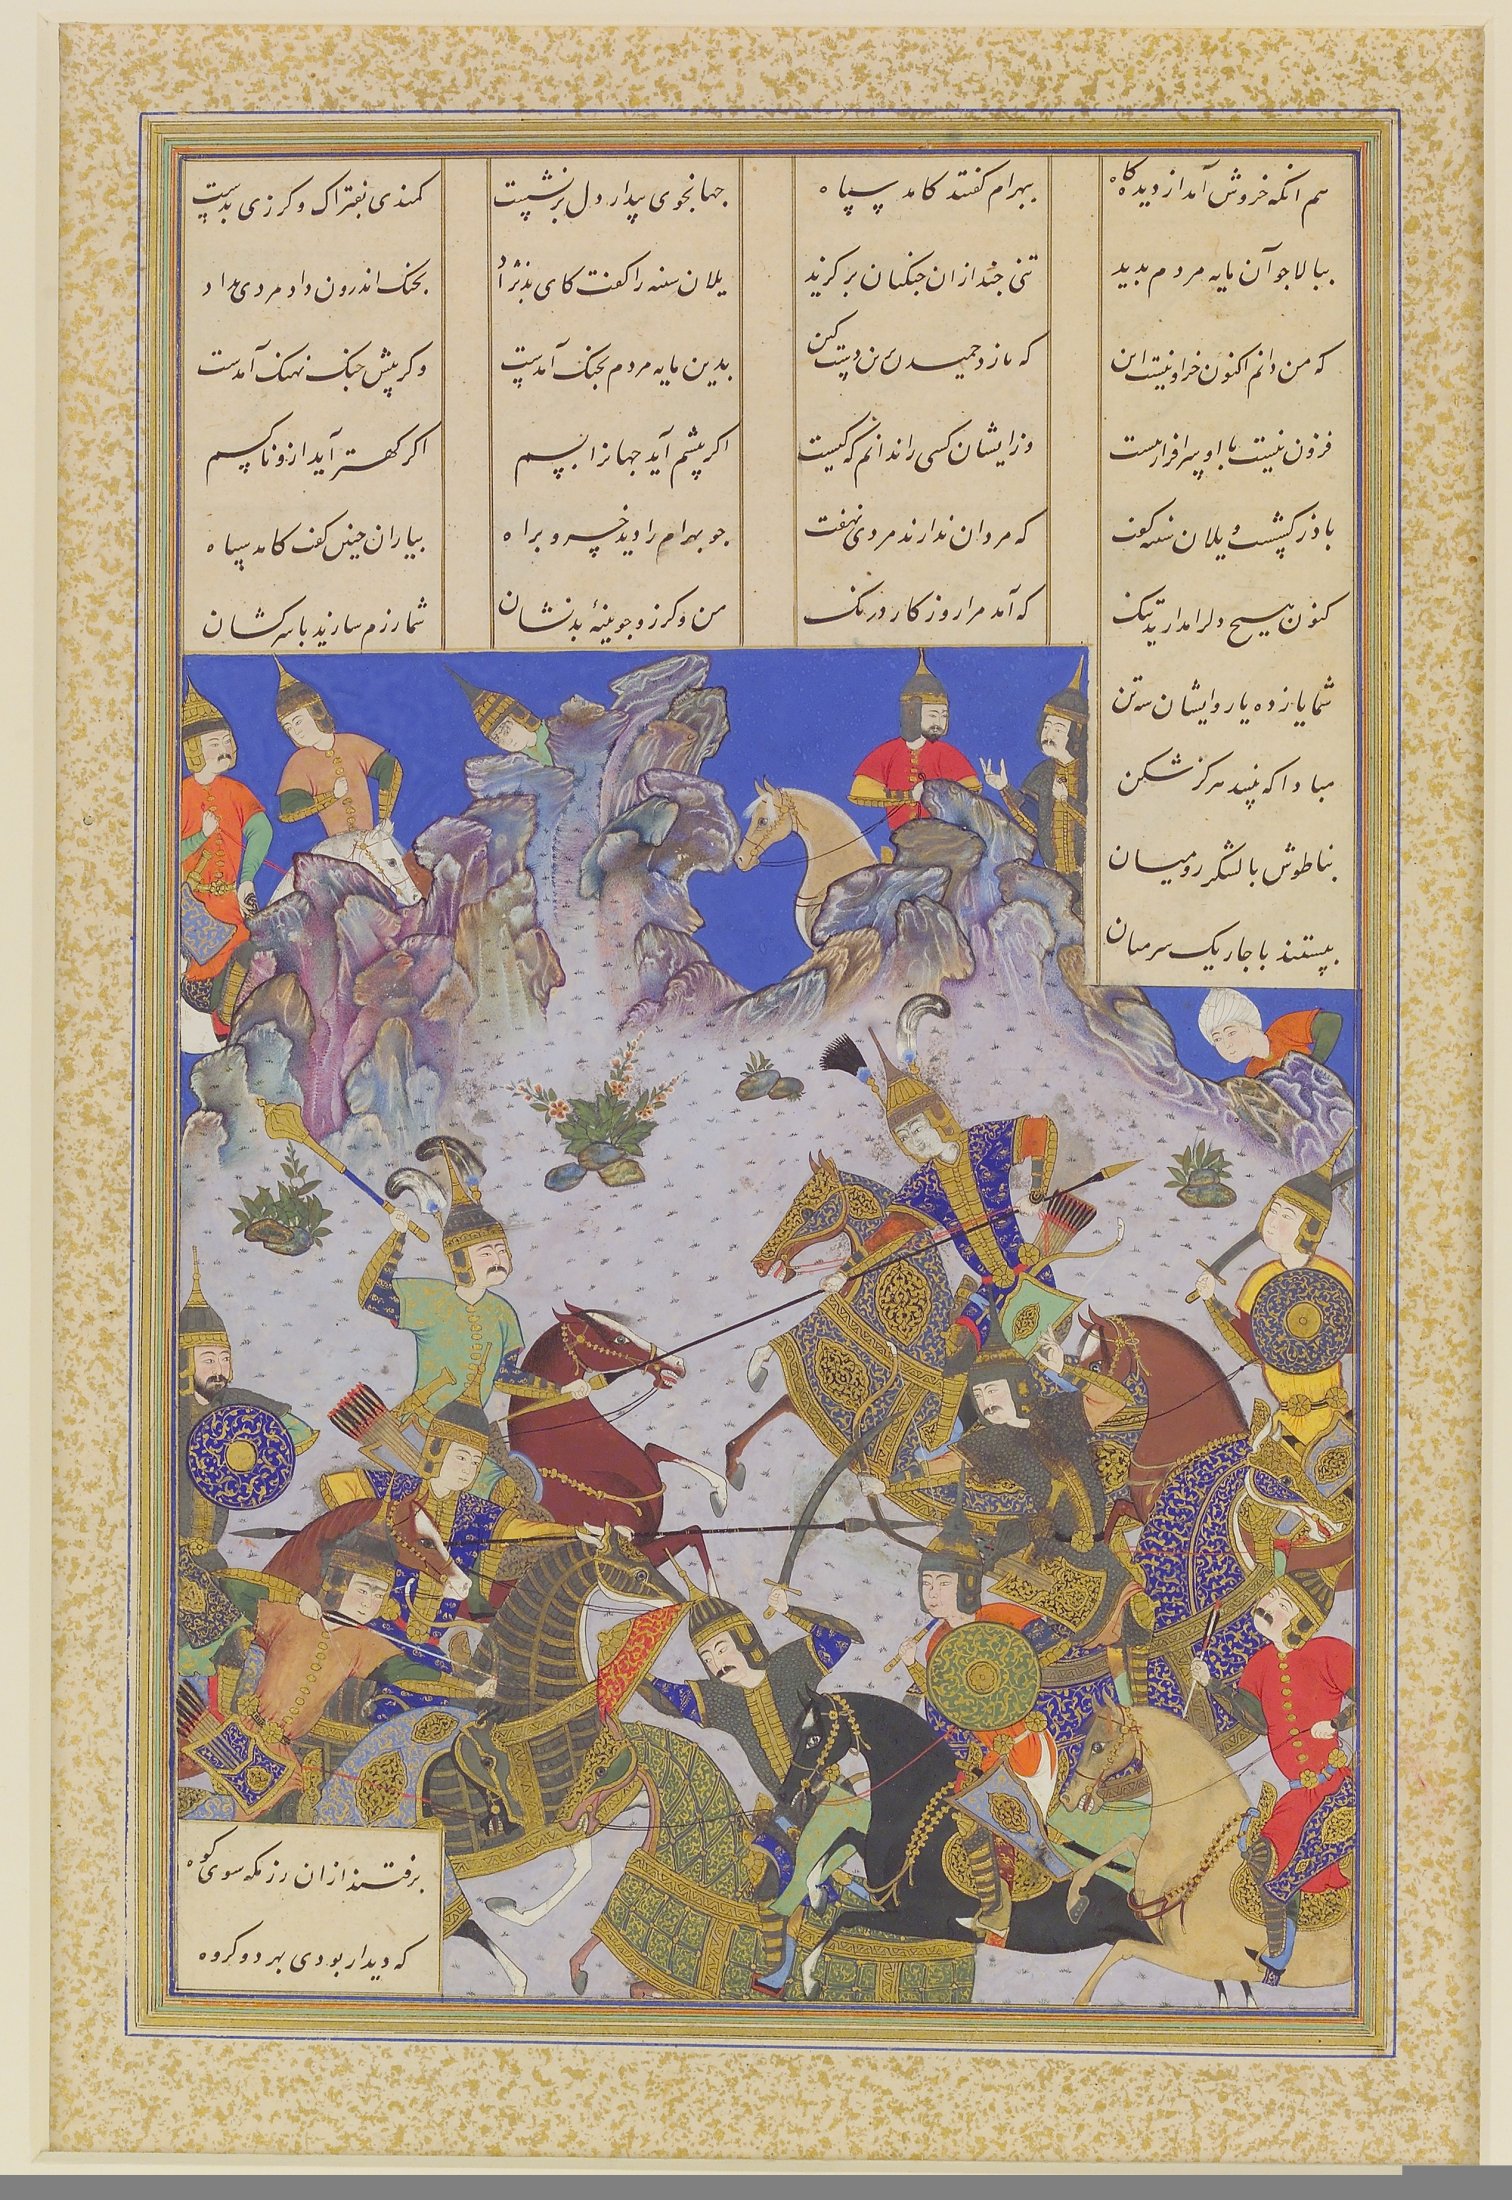  The Fifth Joust Of The Rooks- Ruhham Versus Barman , Folio 342v From The Shahnama (Book Of Kings) Of Shah Tahmasp MET DP120257